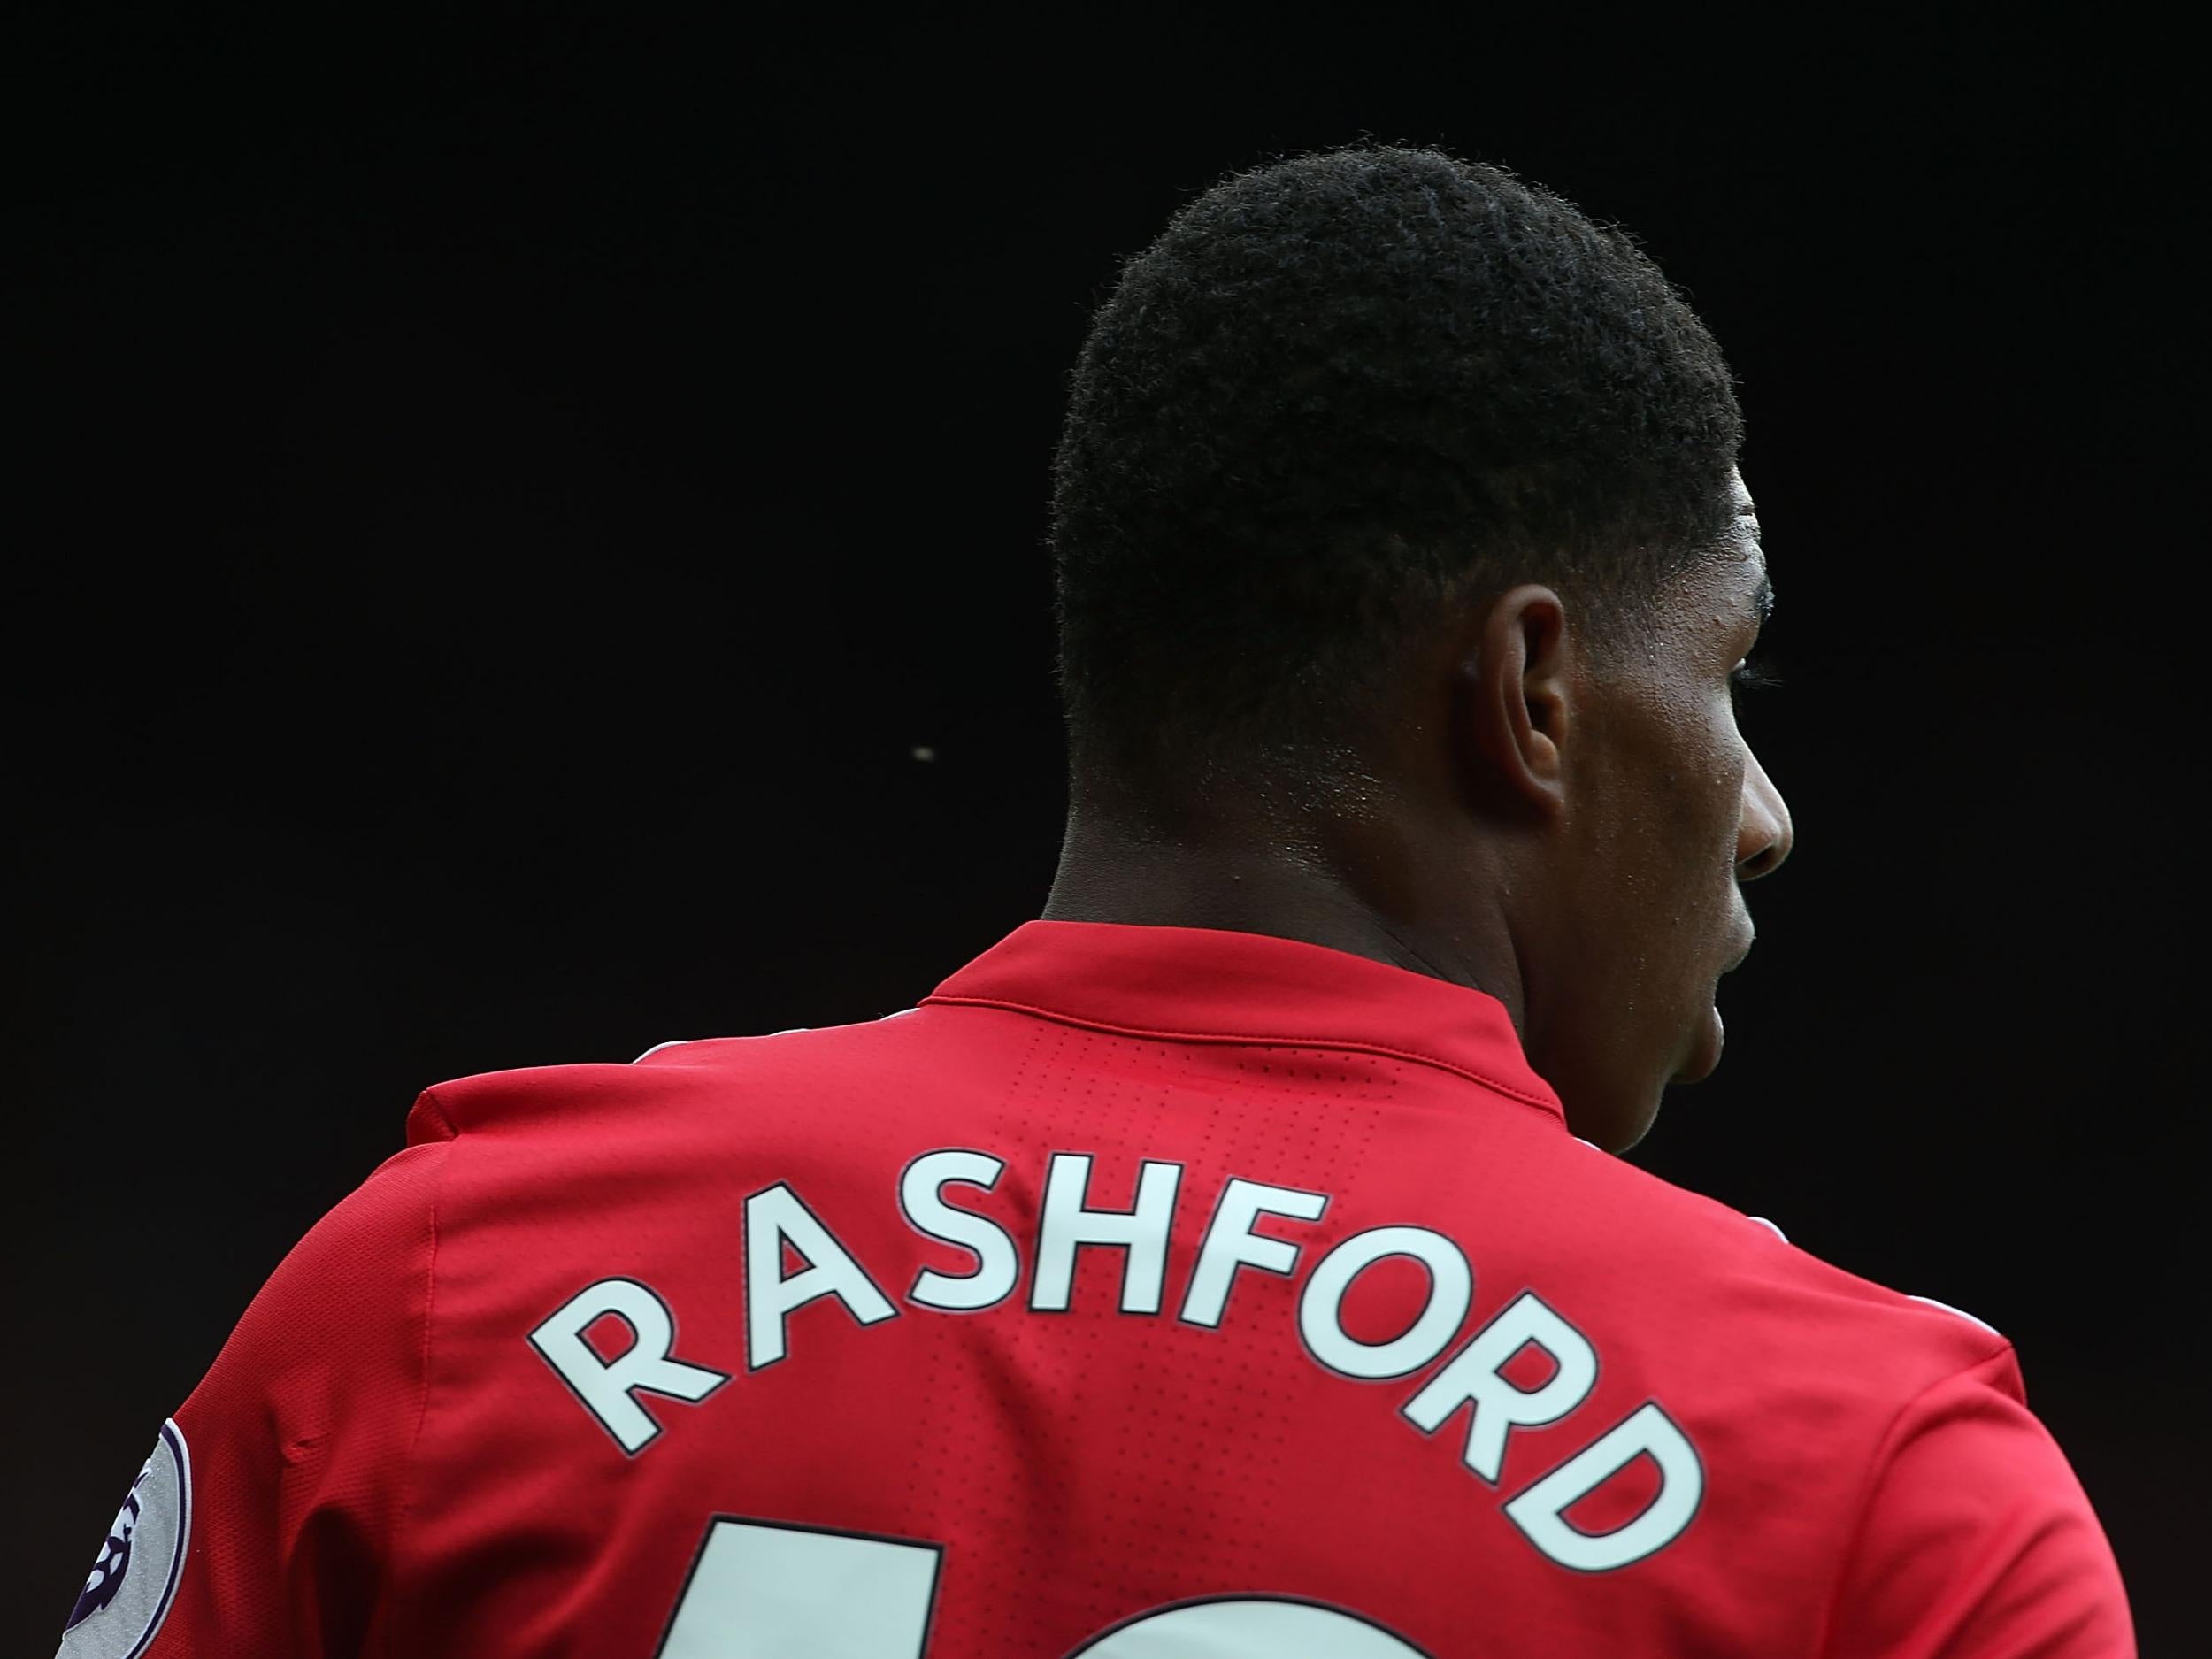 Marcus Rashford was replaced by Anthony Martial on Saturday after failing to make an impact on the game